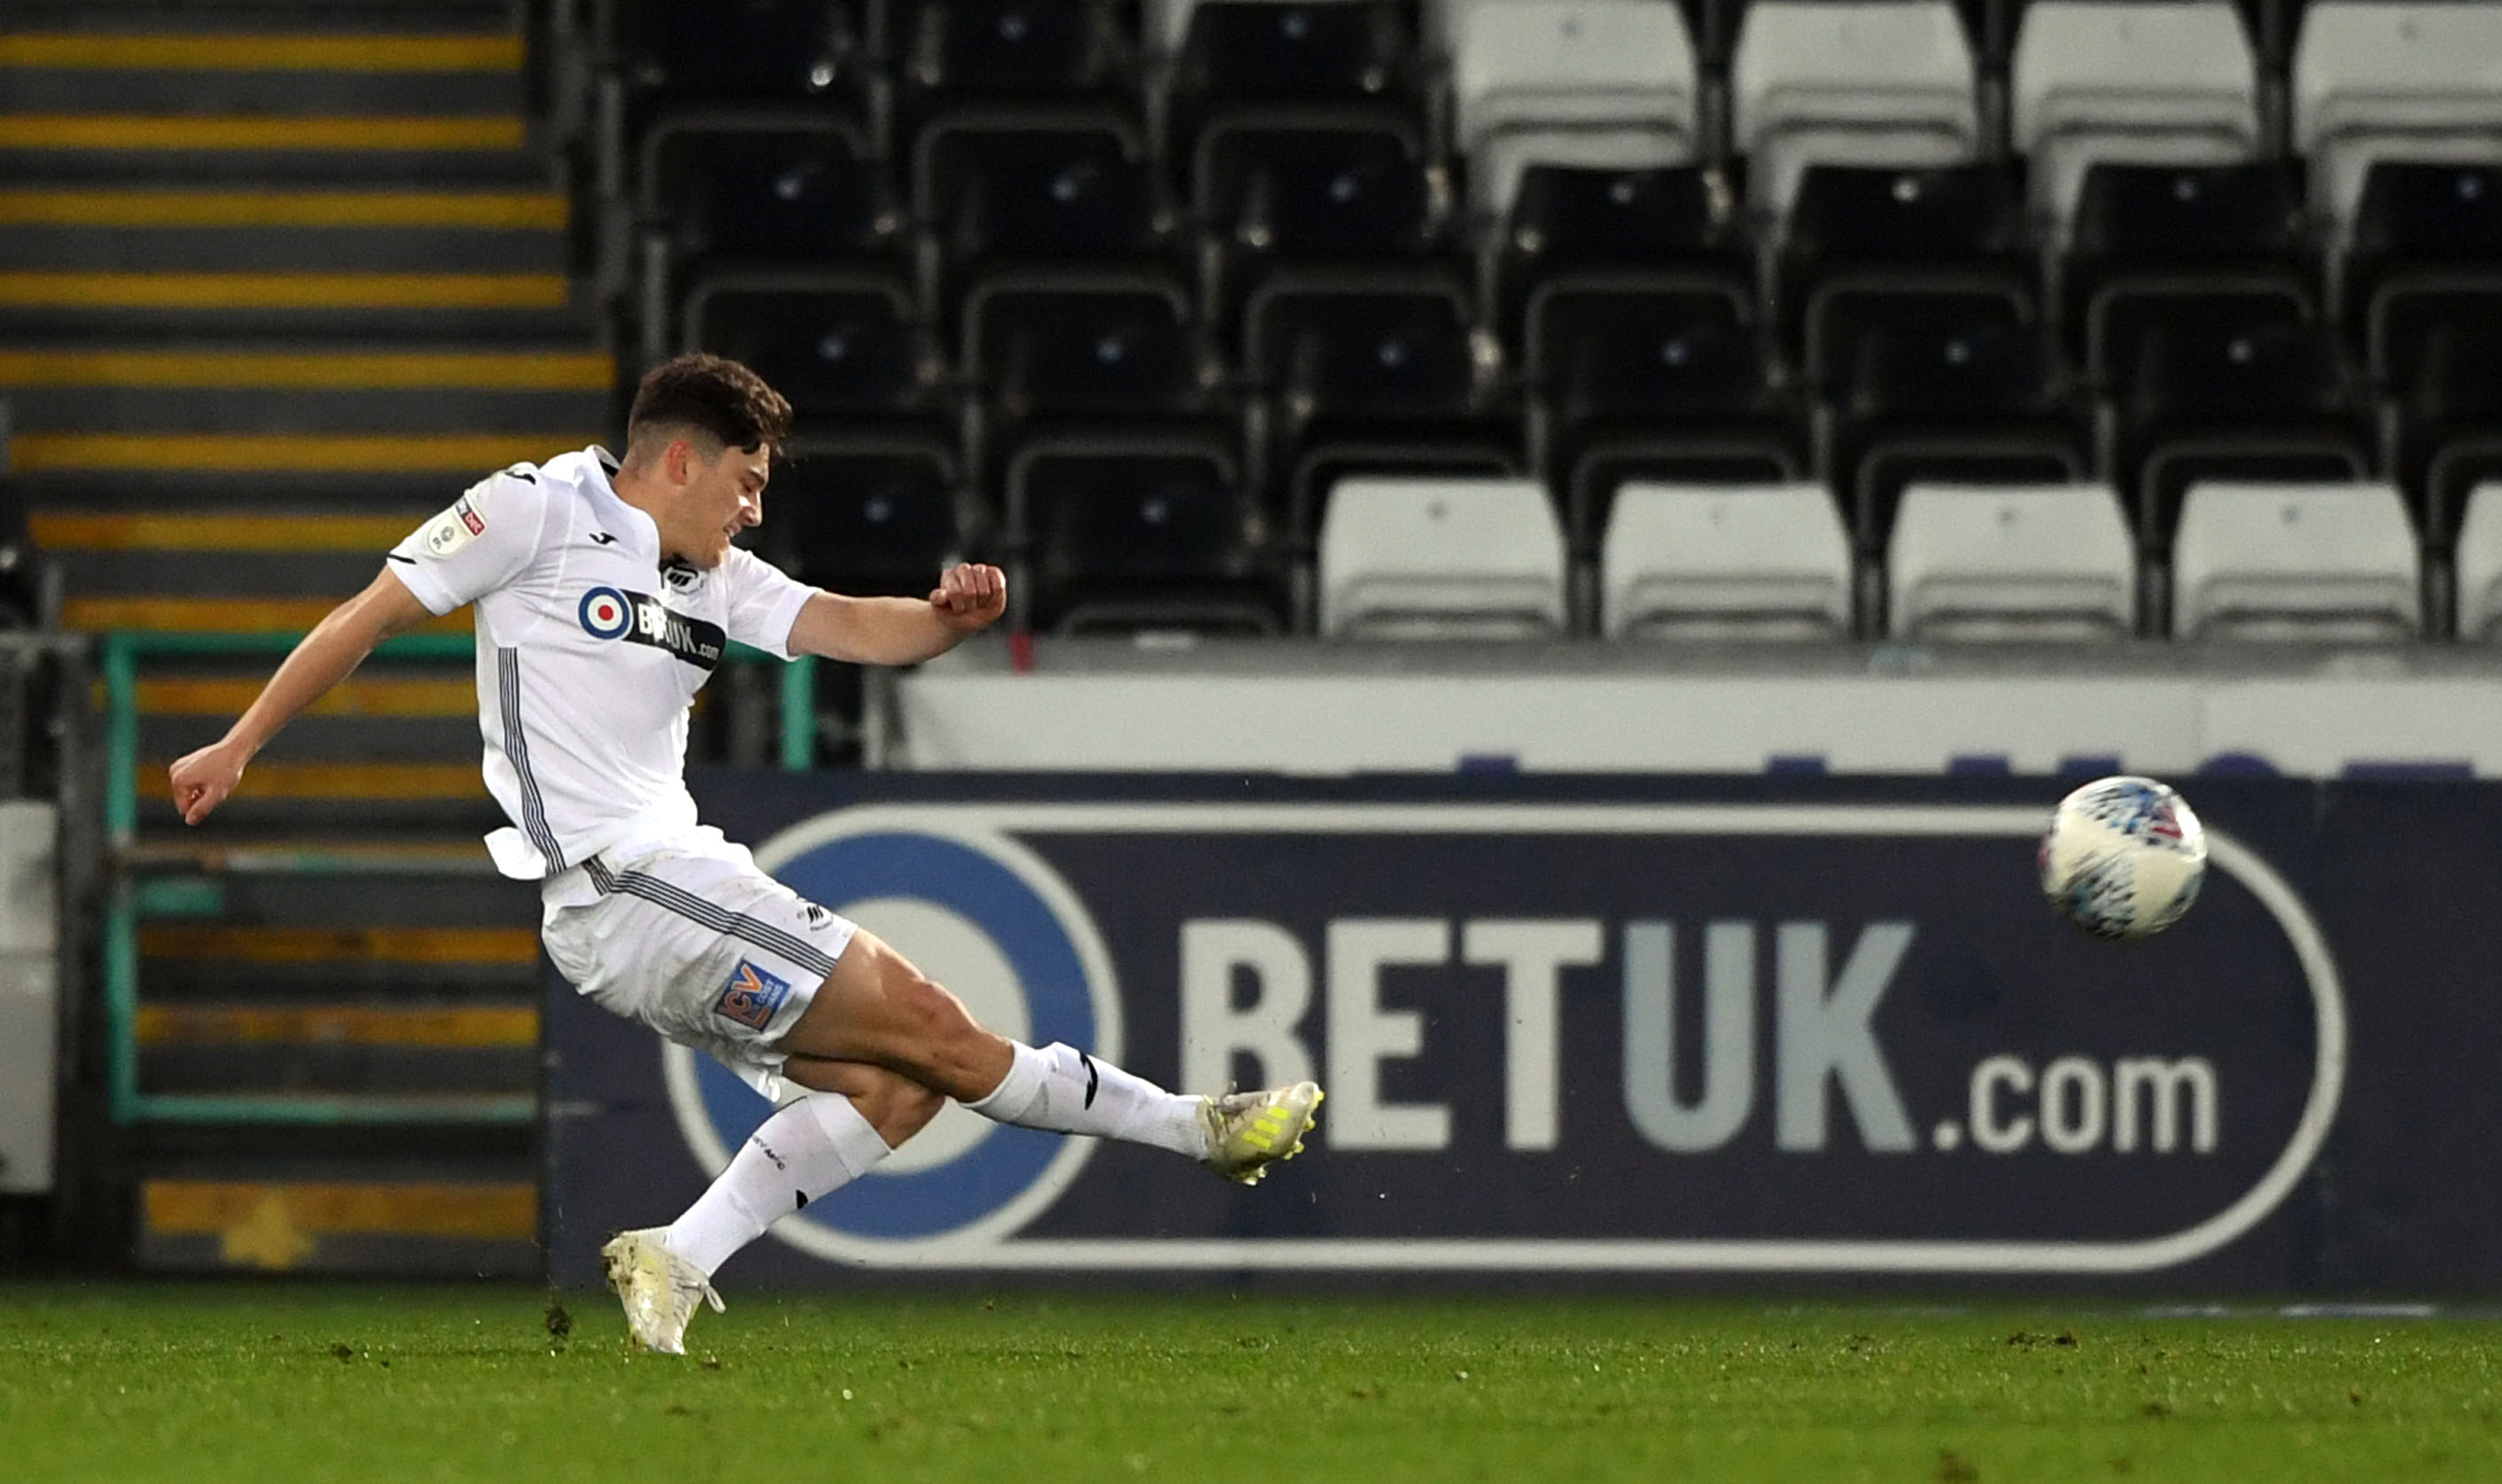 SWANSEA, WALES - APRIL 09: Swansea player Daniel James shoots to score the opening goal during the Sky Bet Championship match between Swansea City and Stoke City at Liberty Stadium on April 09, 2019 in Swansea, Wales. (Photo by Stu Forster/Getty Images)